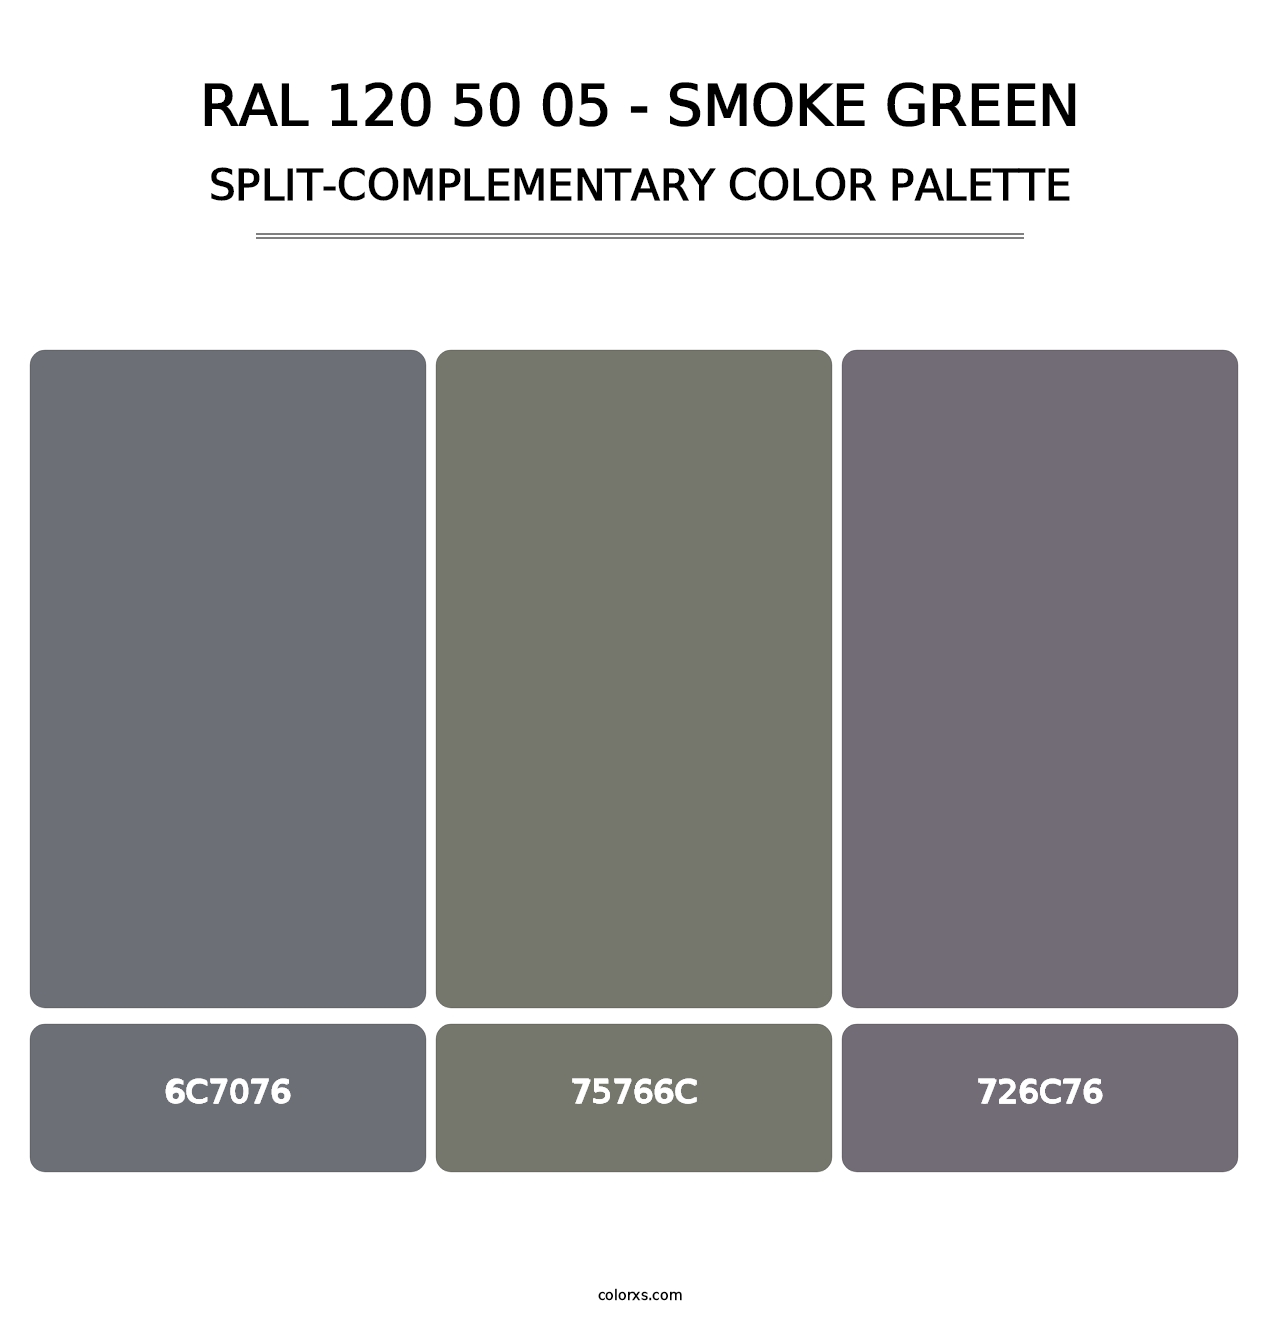 RAL 120 50 05 - Smoke Green - Split-Complementary Color Palette